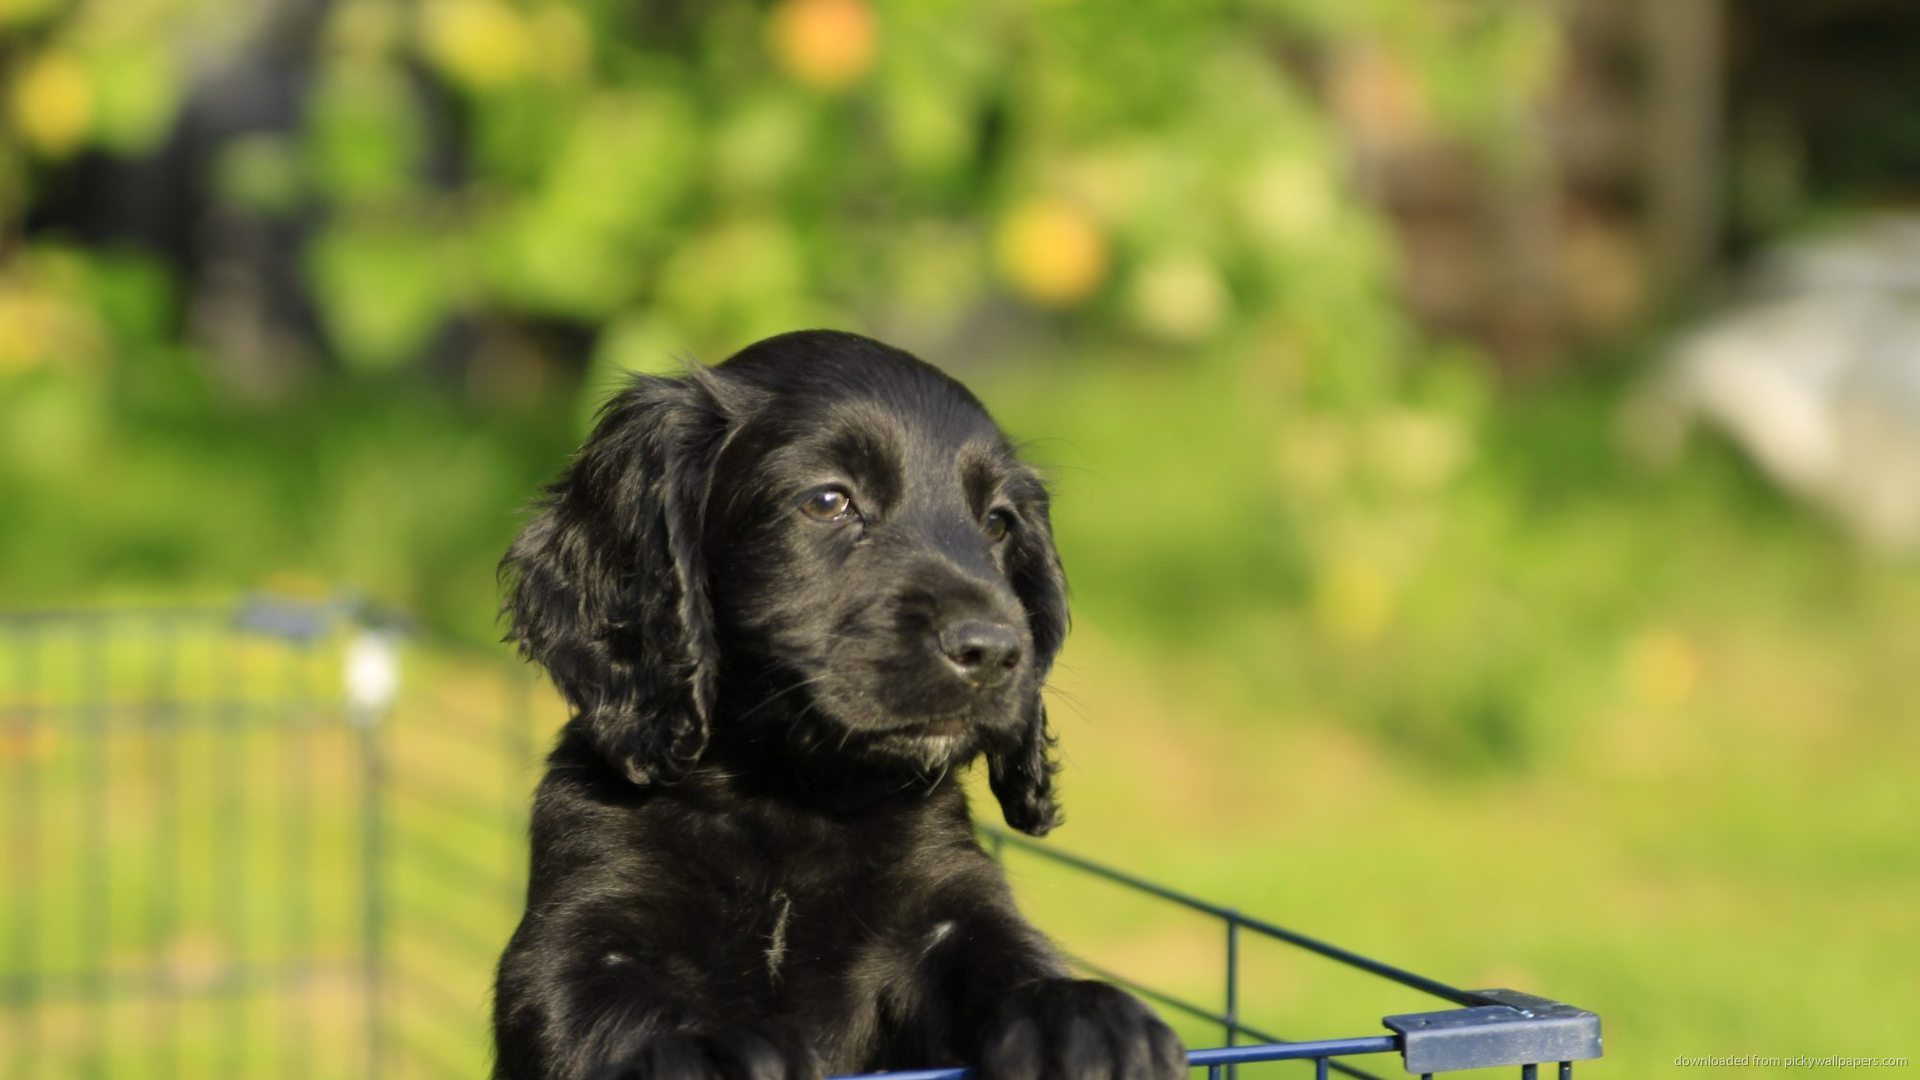 Adorable Black Cocker Spaniel Puppy Wallpaper Picture For iPhone